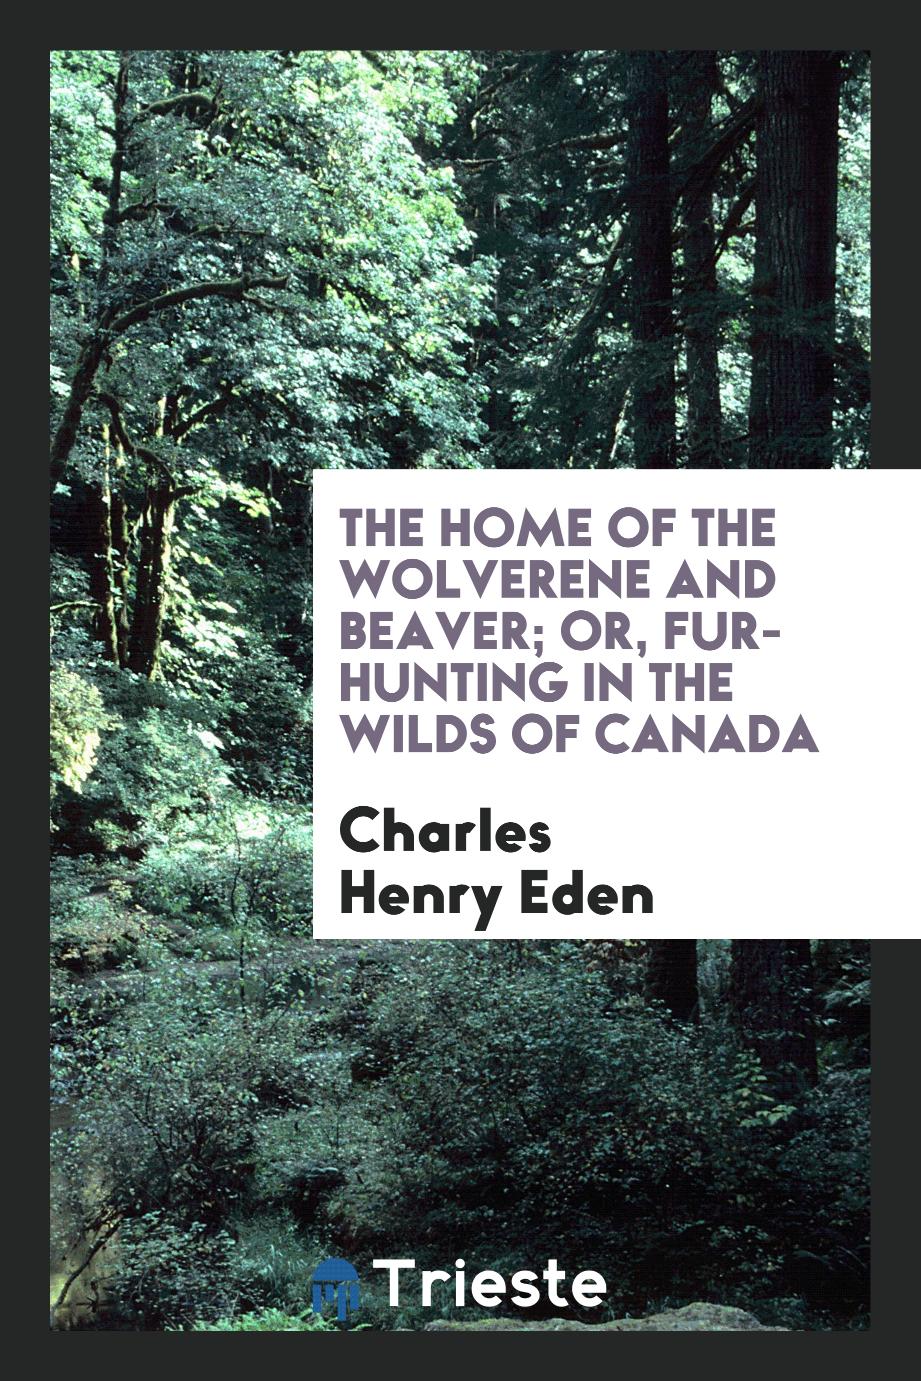 The home of the wolverene and beaver; or, Fur-hunting in the wilds of Canada